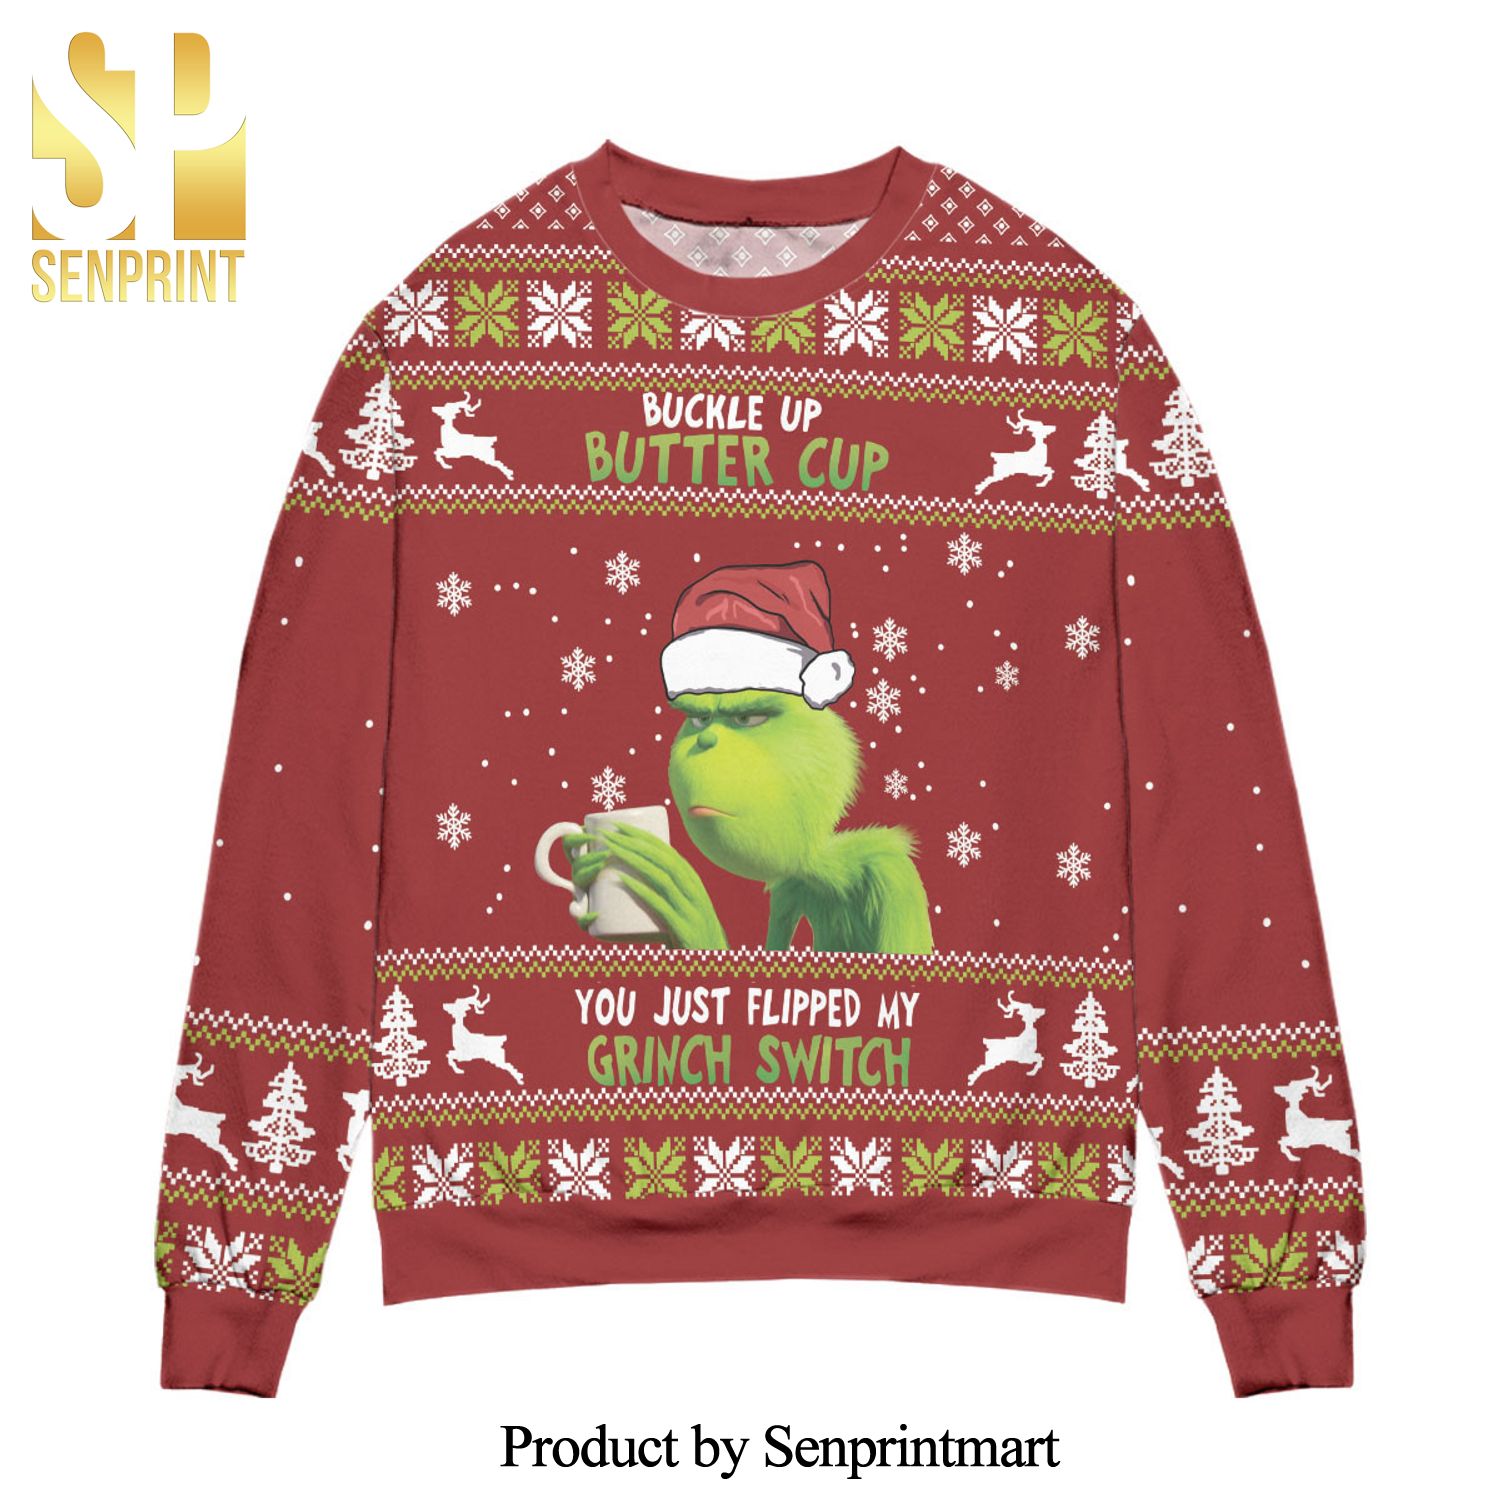 You Just Flipped My Grinch Switch Knitted Ugly Christmas Sweater – Red